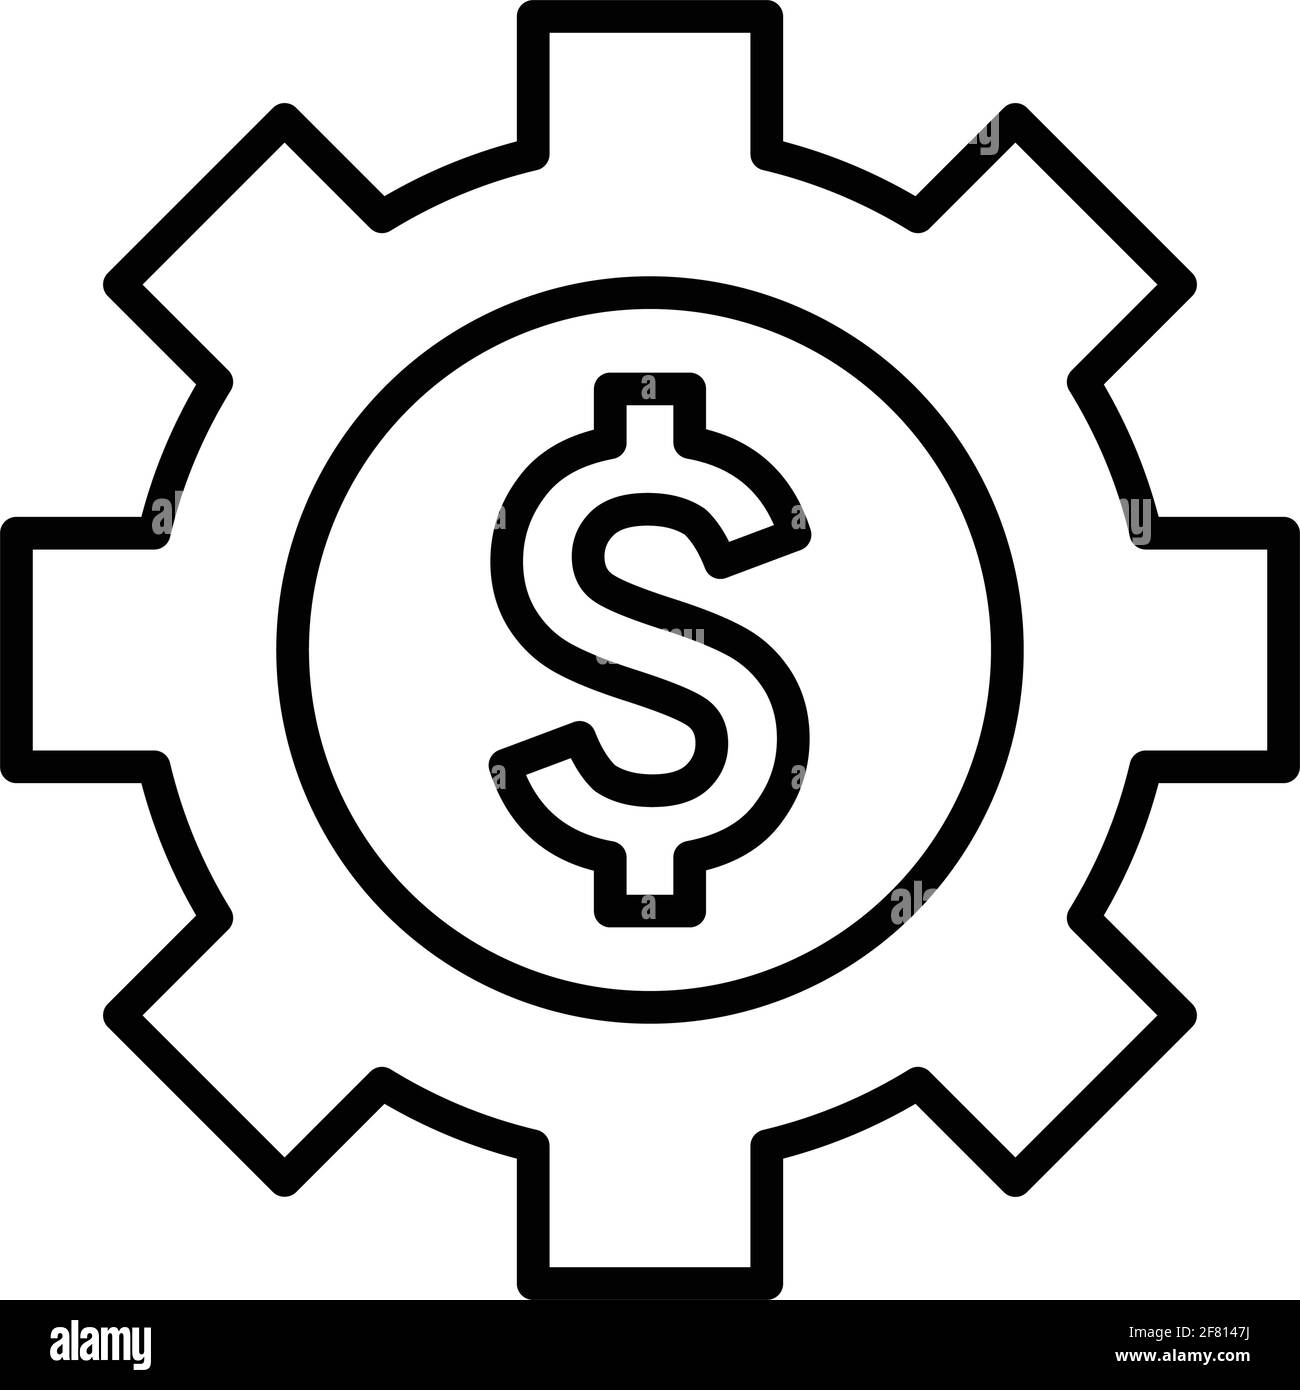 Gear,, money, dollar, factory, development cost icon is isolated on white background. Simple vector illustration for graphic and web design or commerc Stock Vector